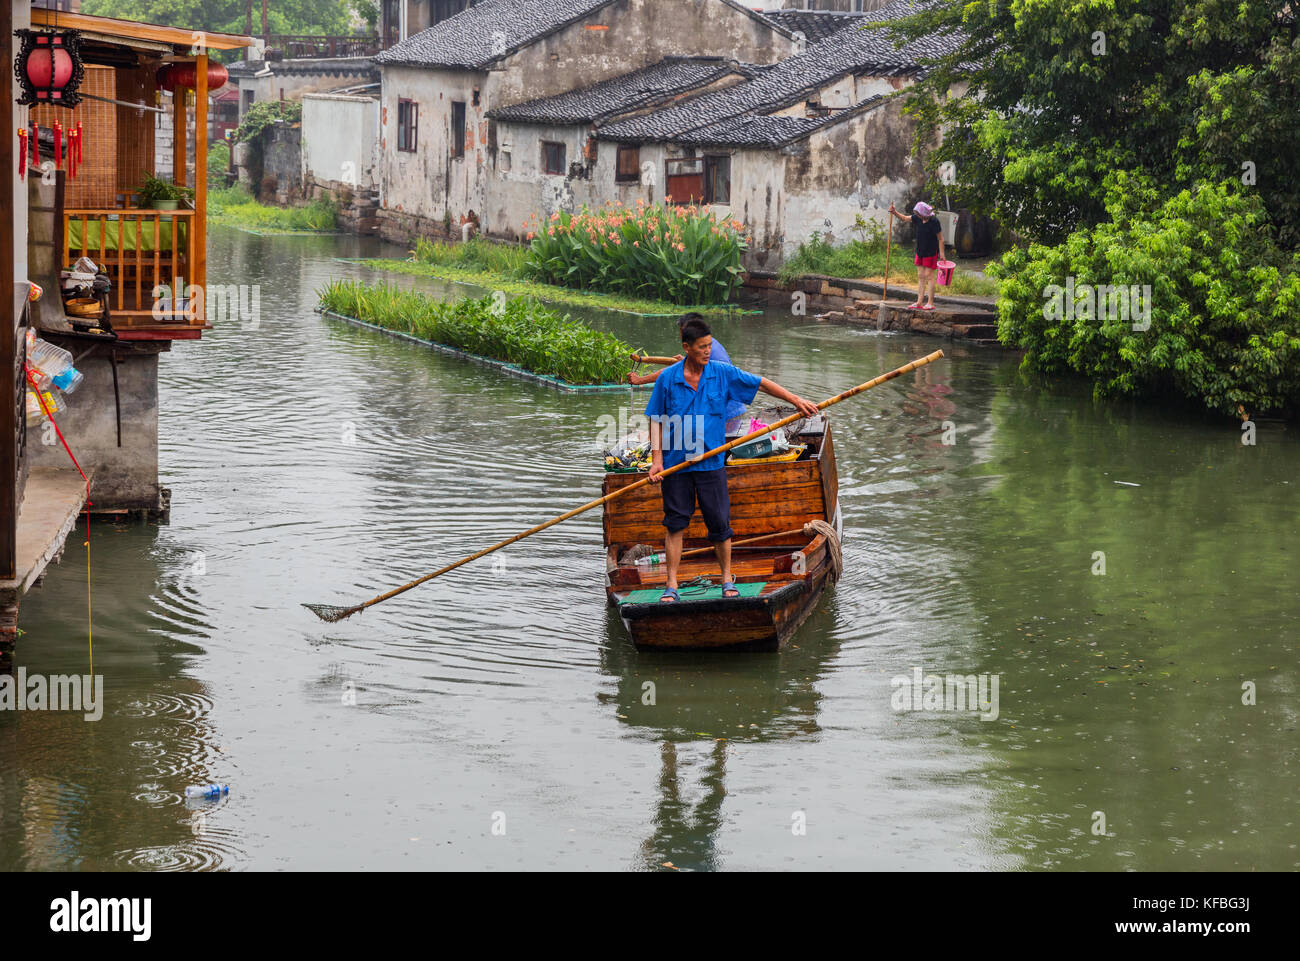 Tongli, the water city in china (Venice of Asia) is a popular and beautiful city in china for many tourists come to see the old town and traditional c Stock Photo